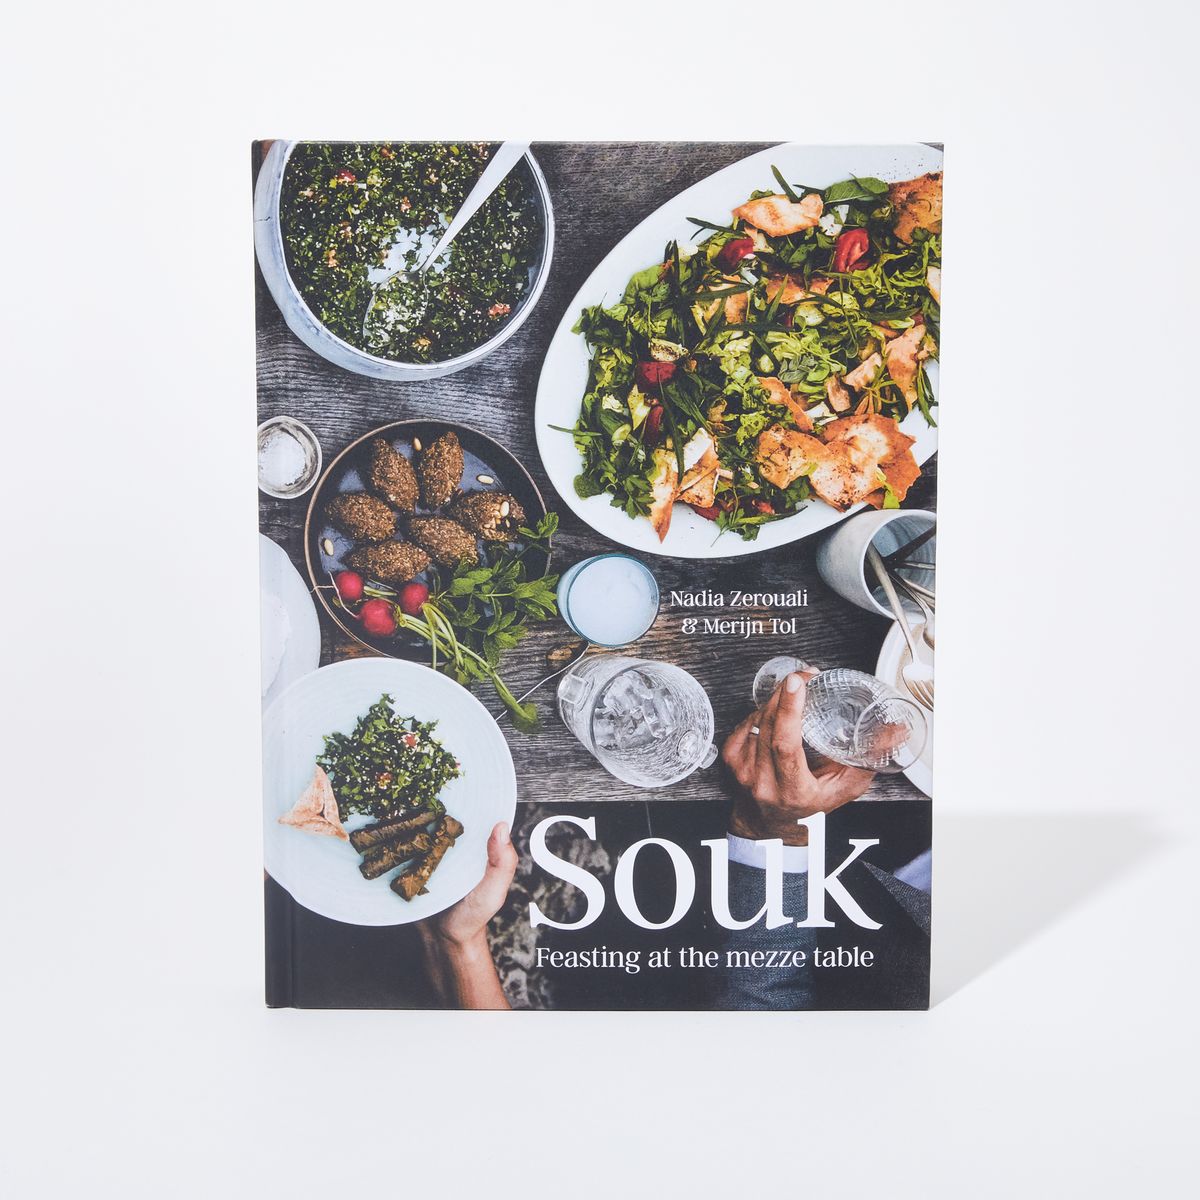 Book cover with a overhead photo of a table with a variety of mezze with the title "Souk" and the text "Feasting at the mezze table"